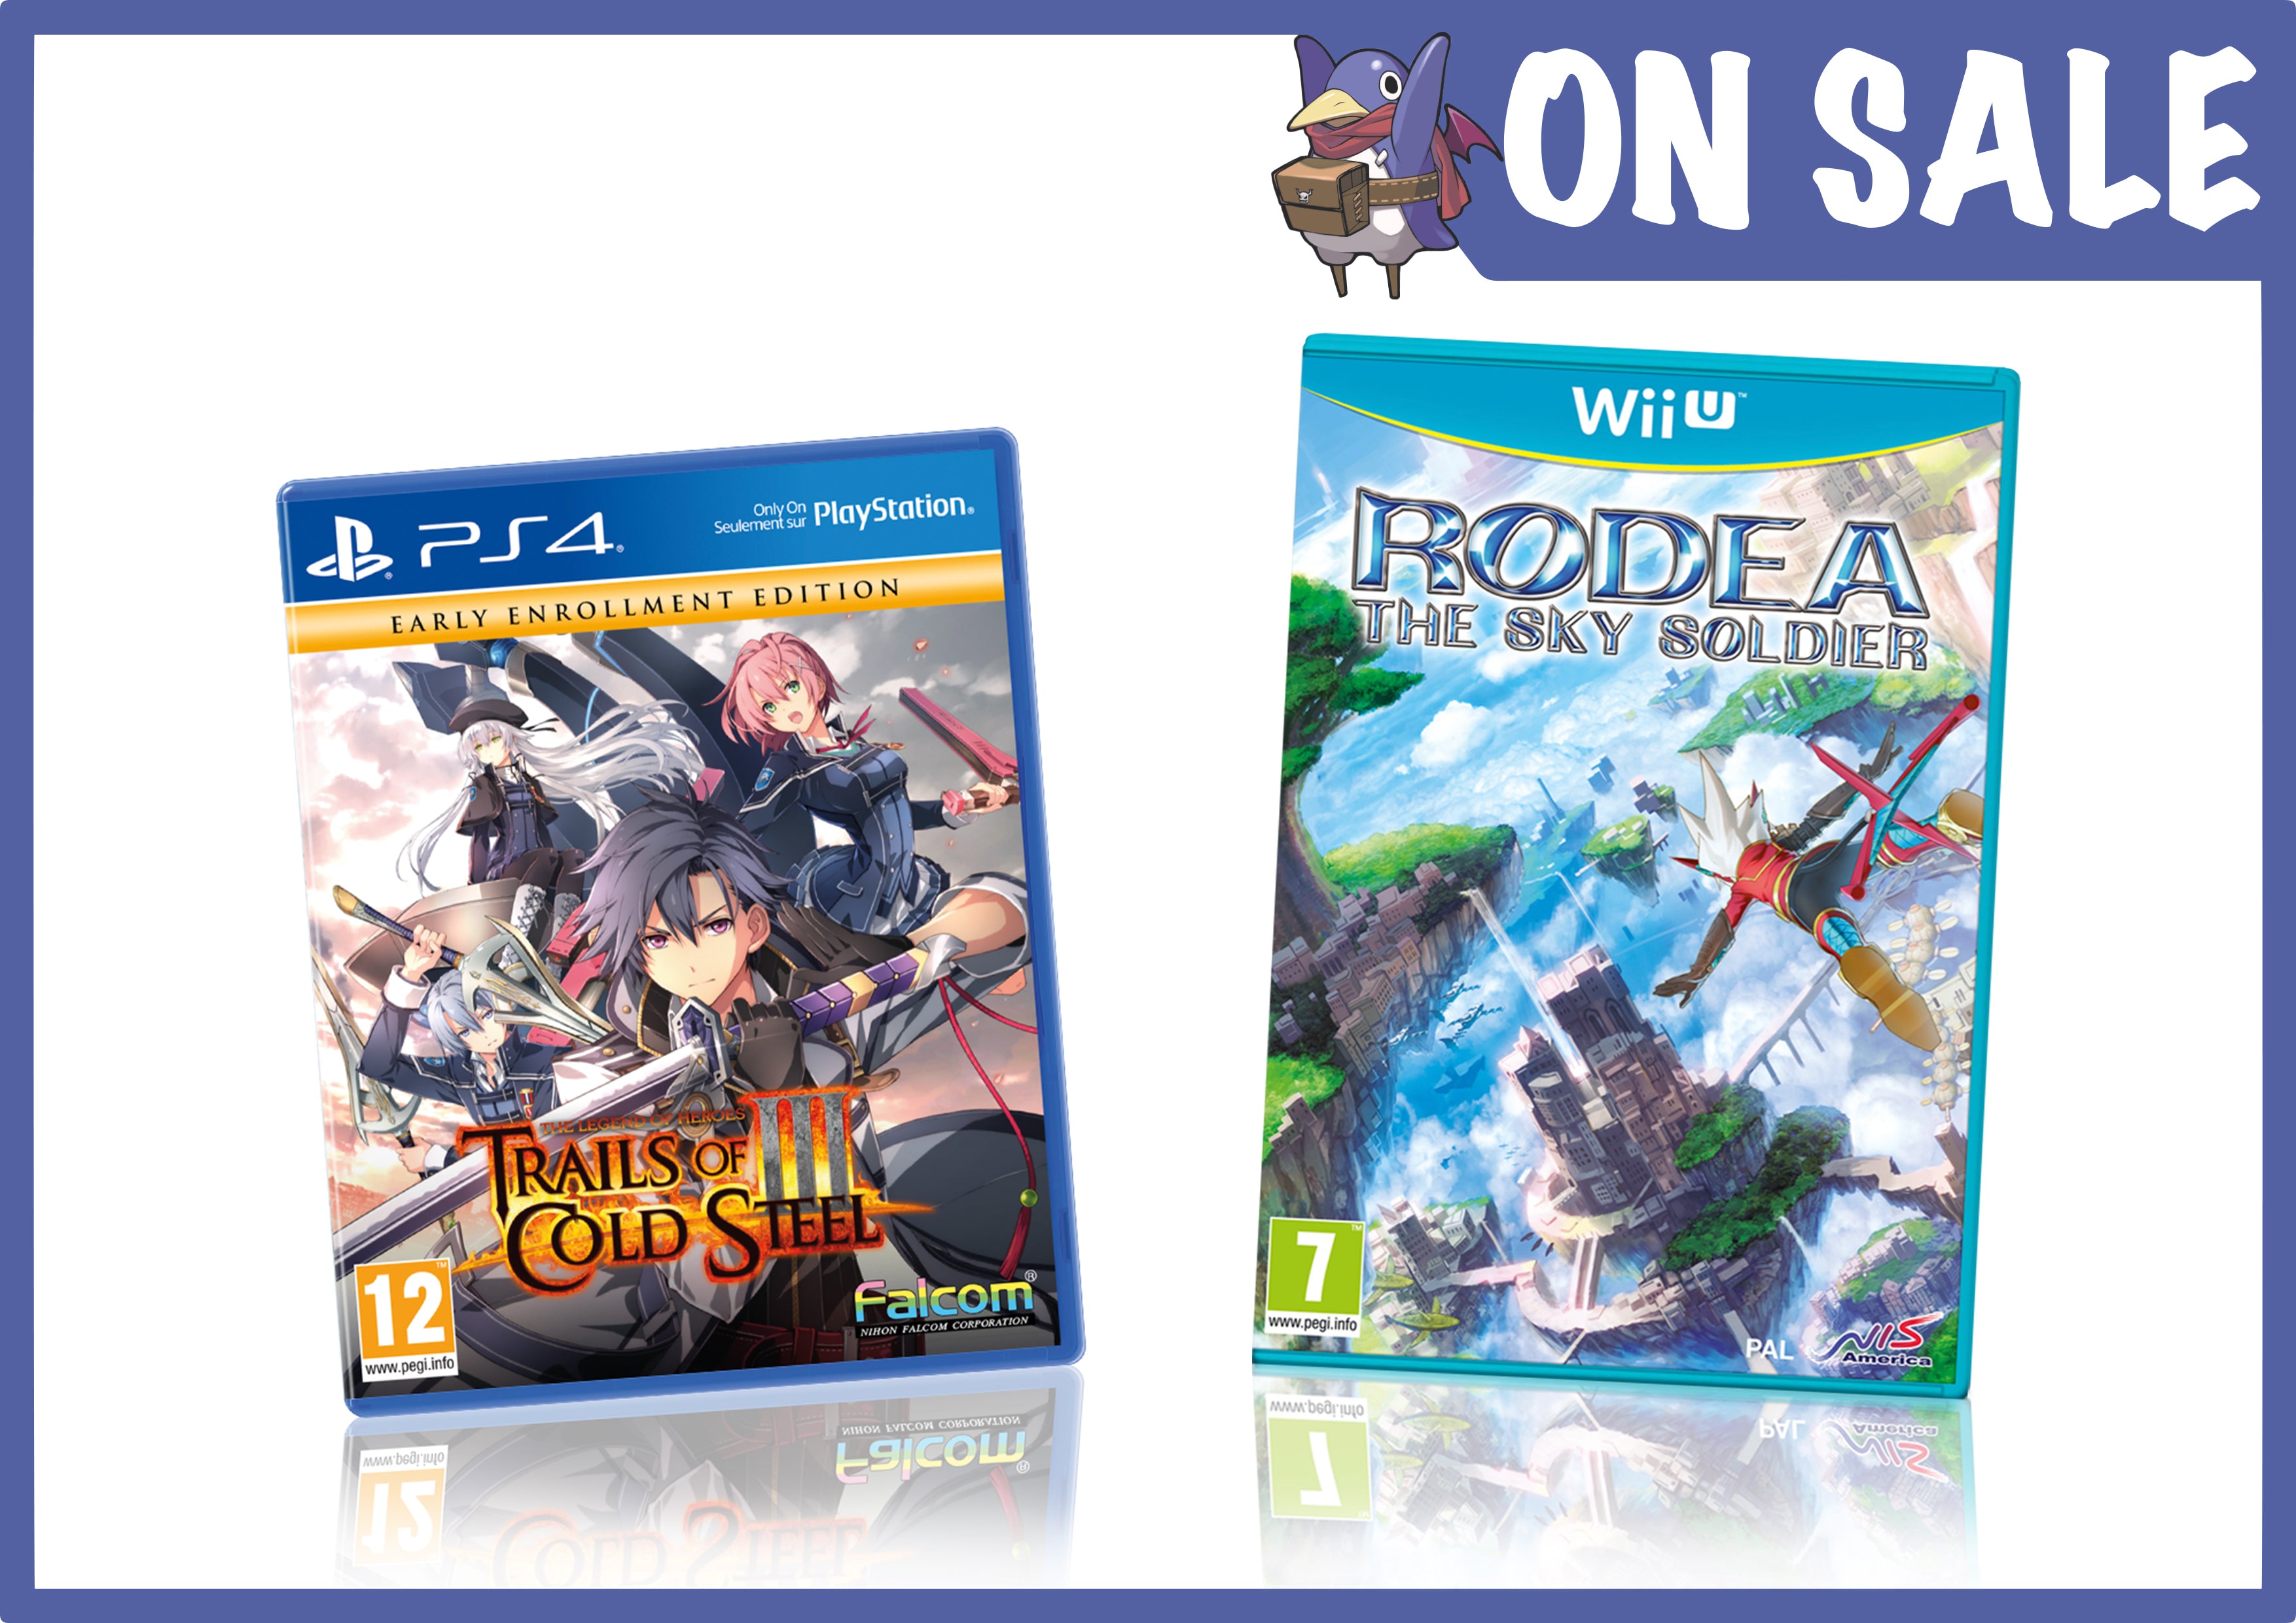 Deal of the Week - The Legend of Heroes: Trails of Cold Steel III and Rodea the Sky Soldier!